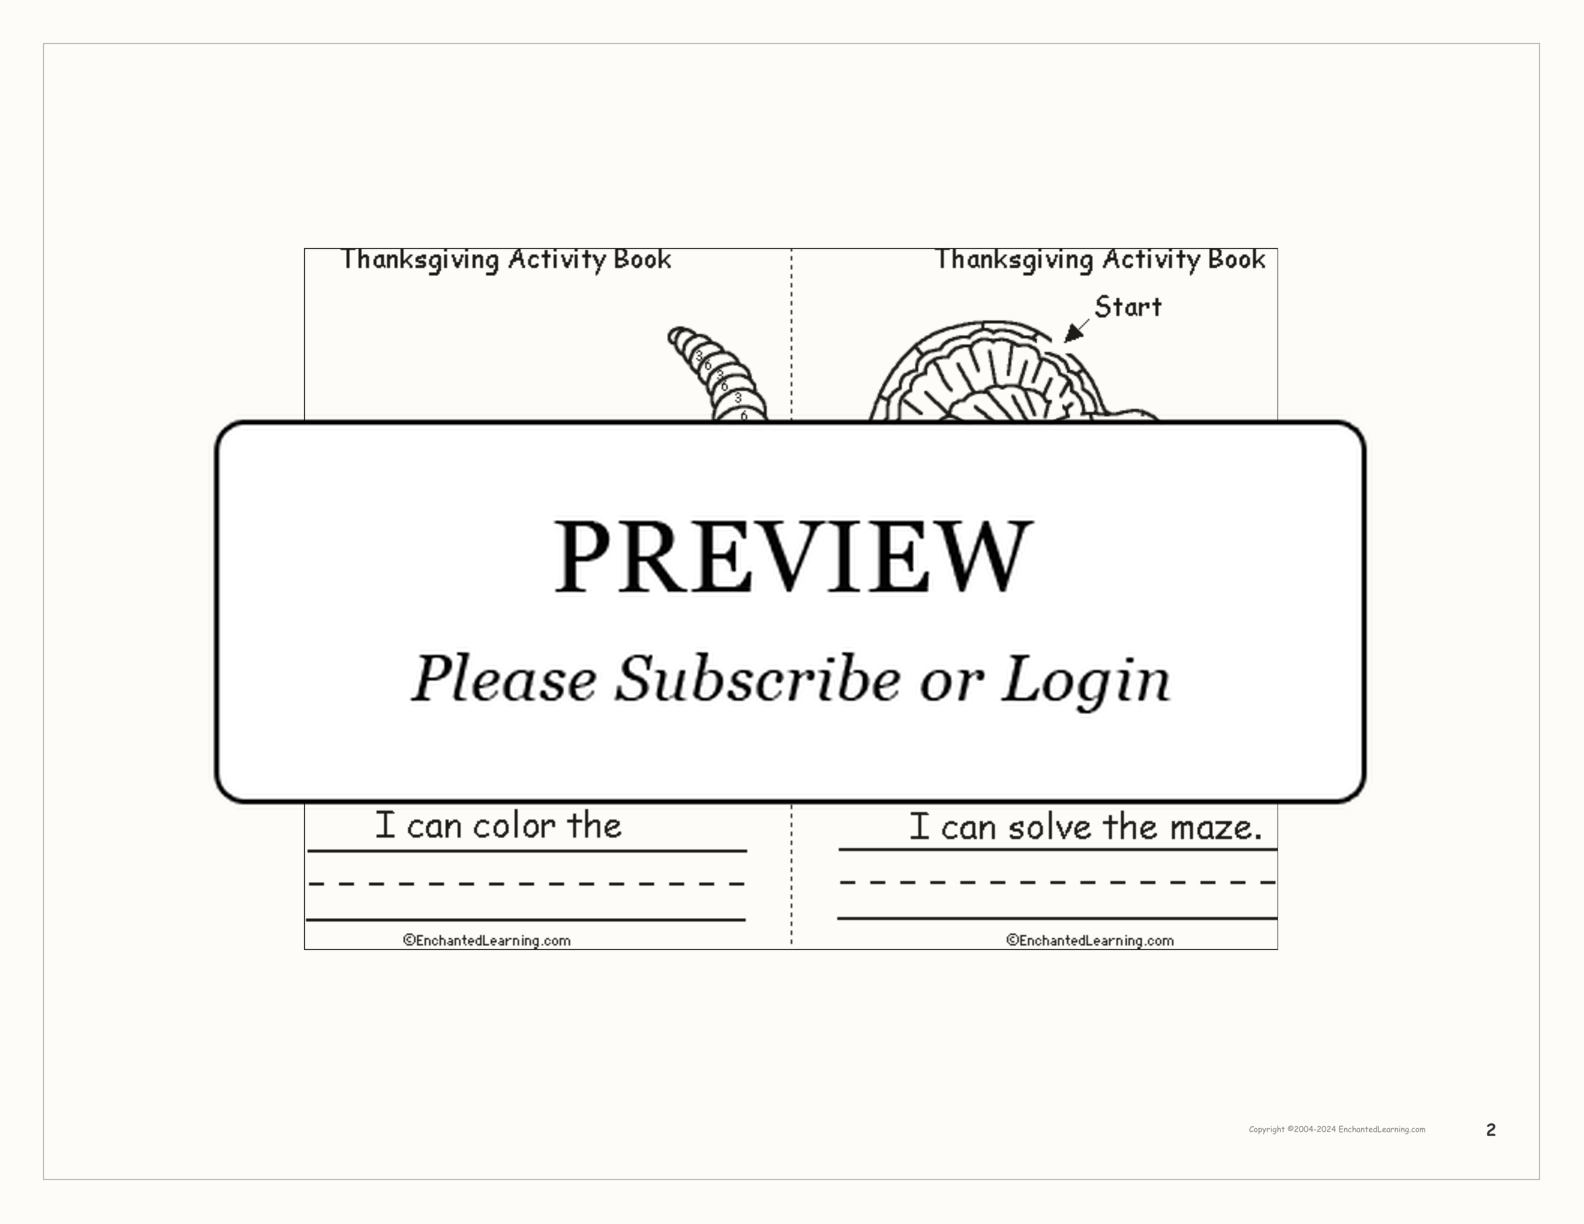 Thanksgiving Activity Book interactive worksheet page 2